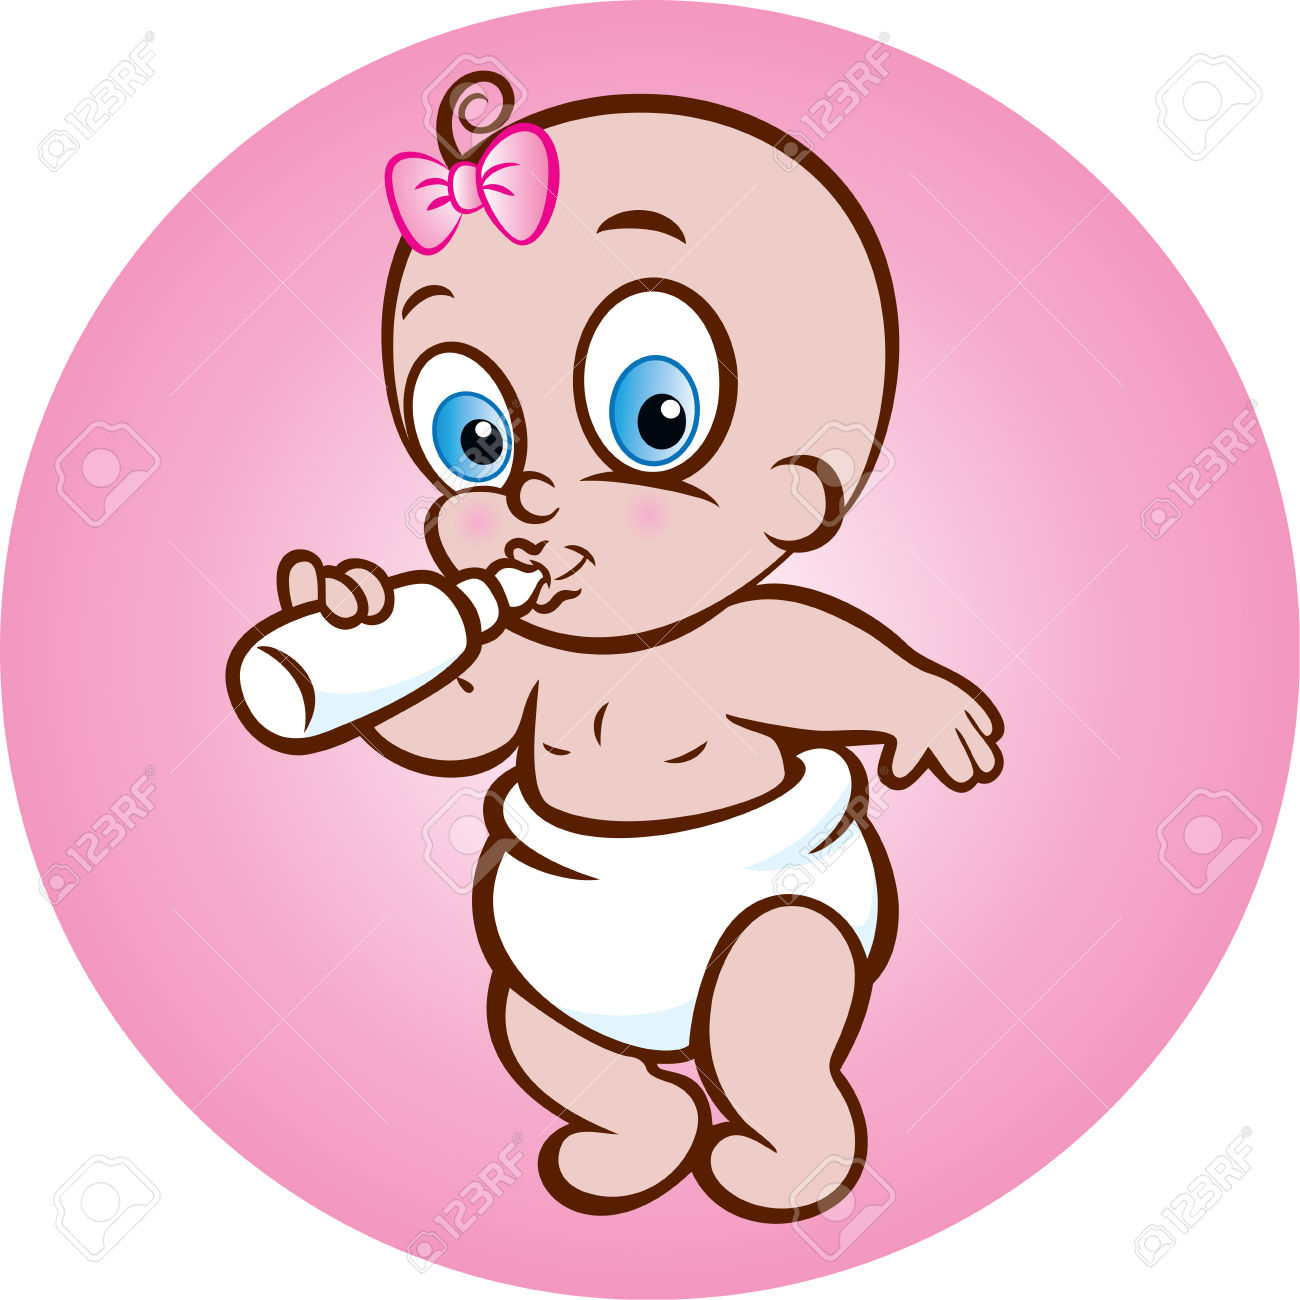 8,510 Baby Diaper Stock Vector Illustration And Royalty Free Baby.